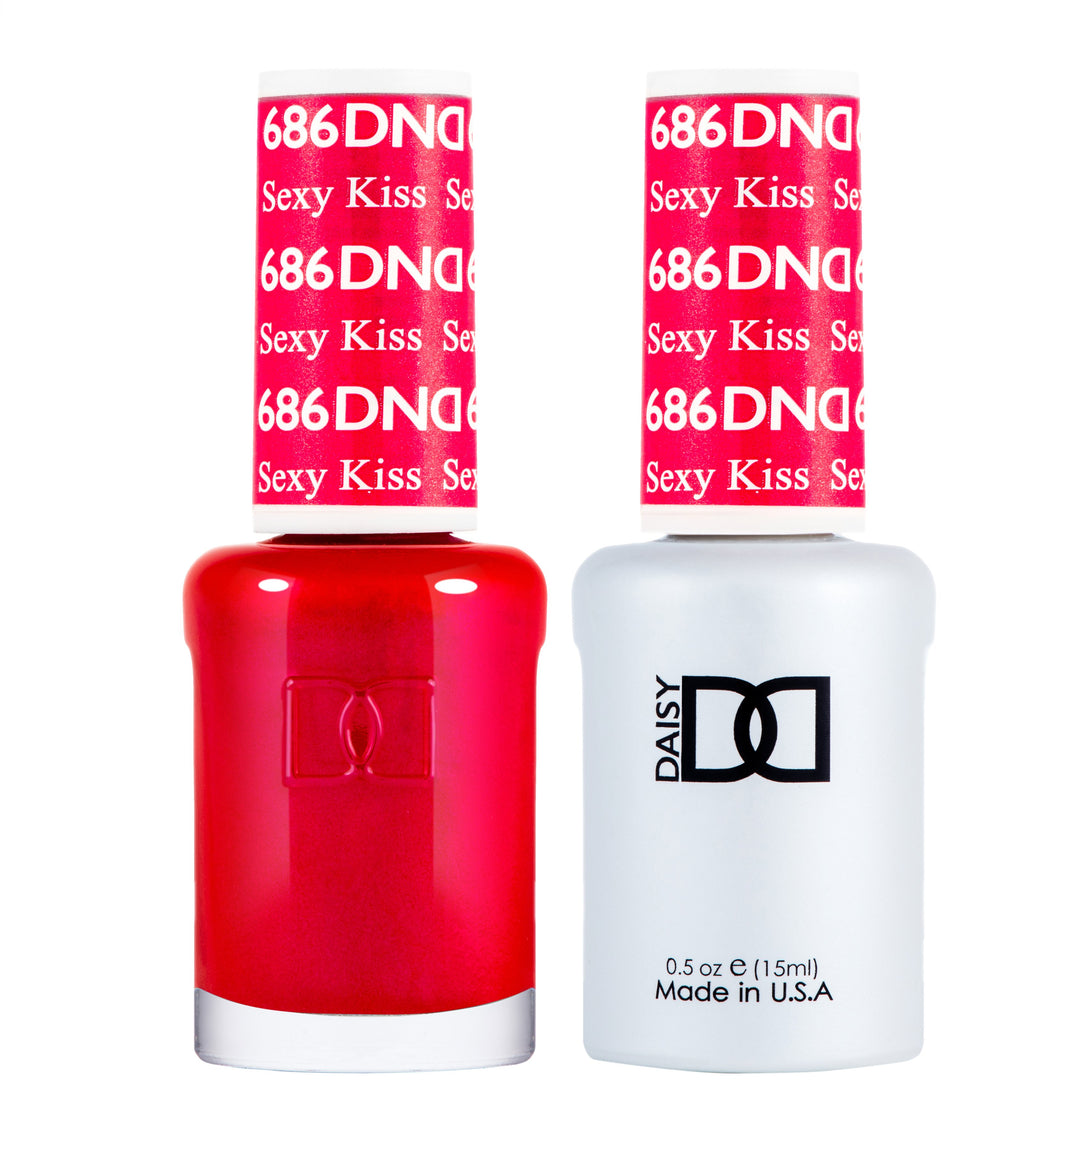 DND DUO Nail Lacquer and UV|LED Gel Polish Sexy Kiss 686 (2 x 15ml)